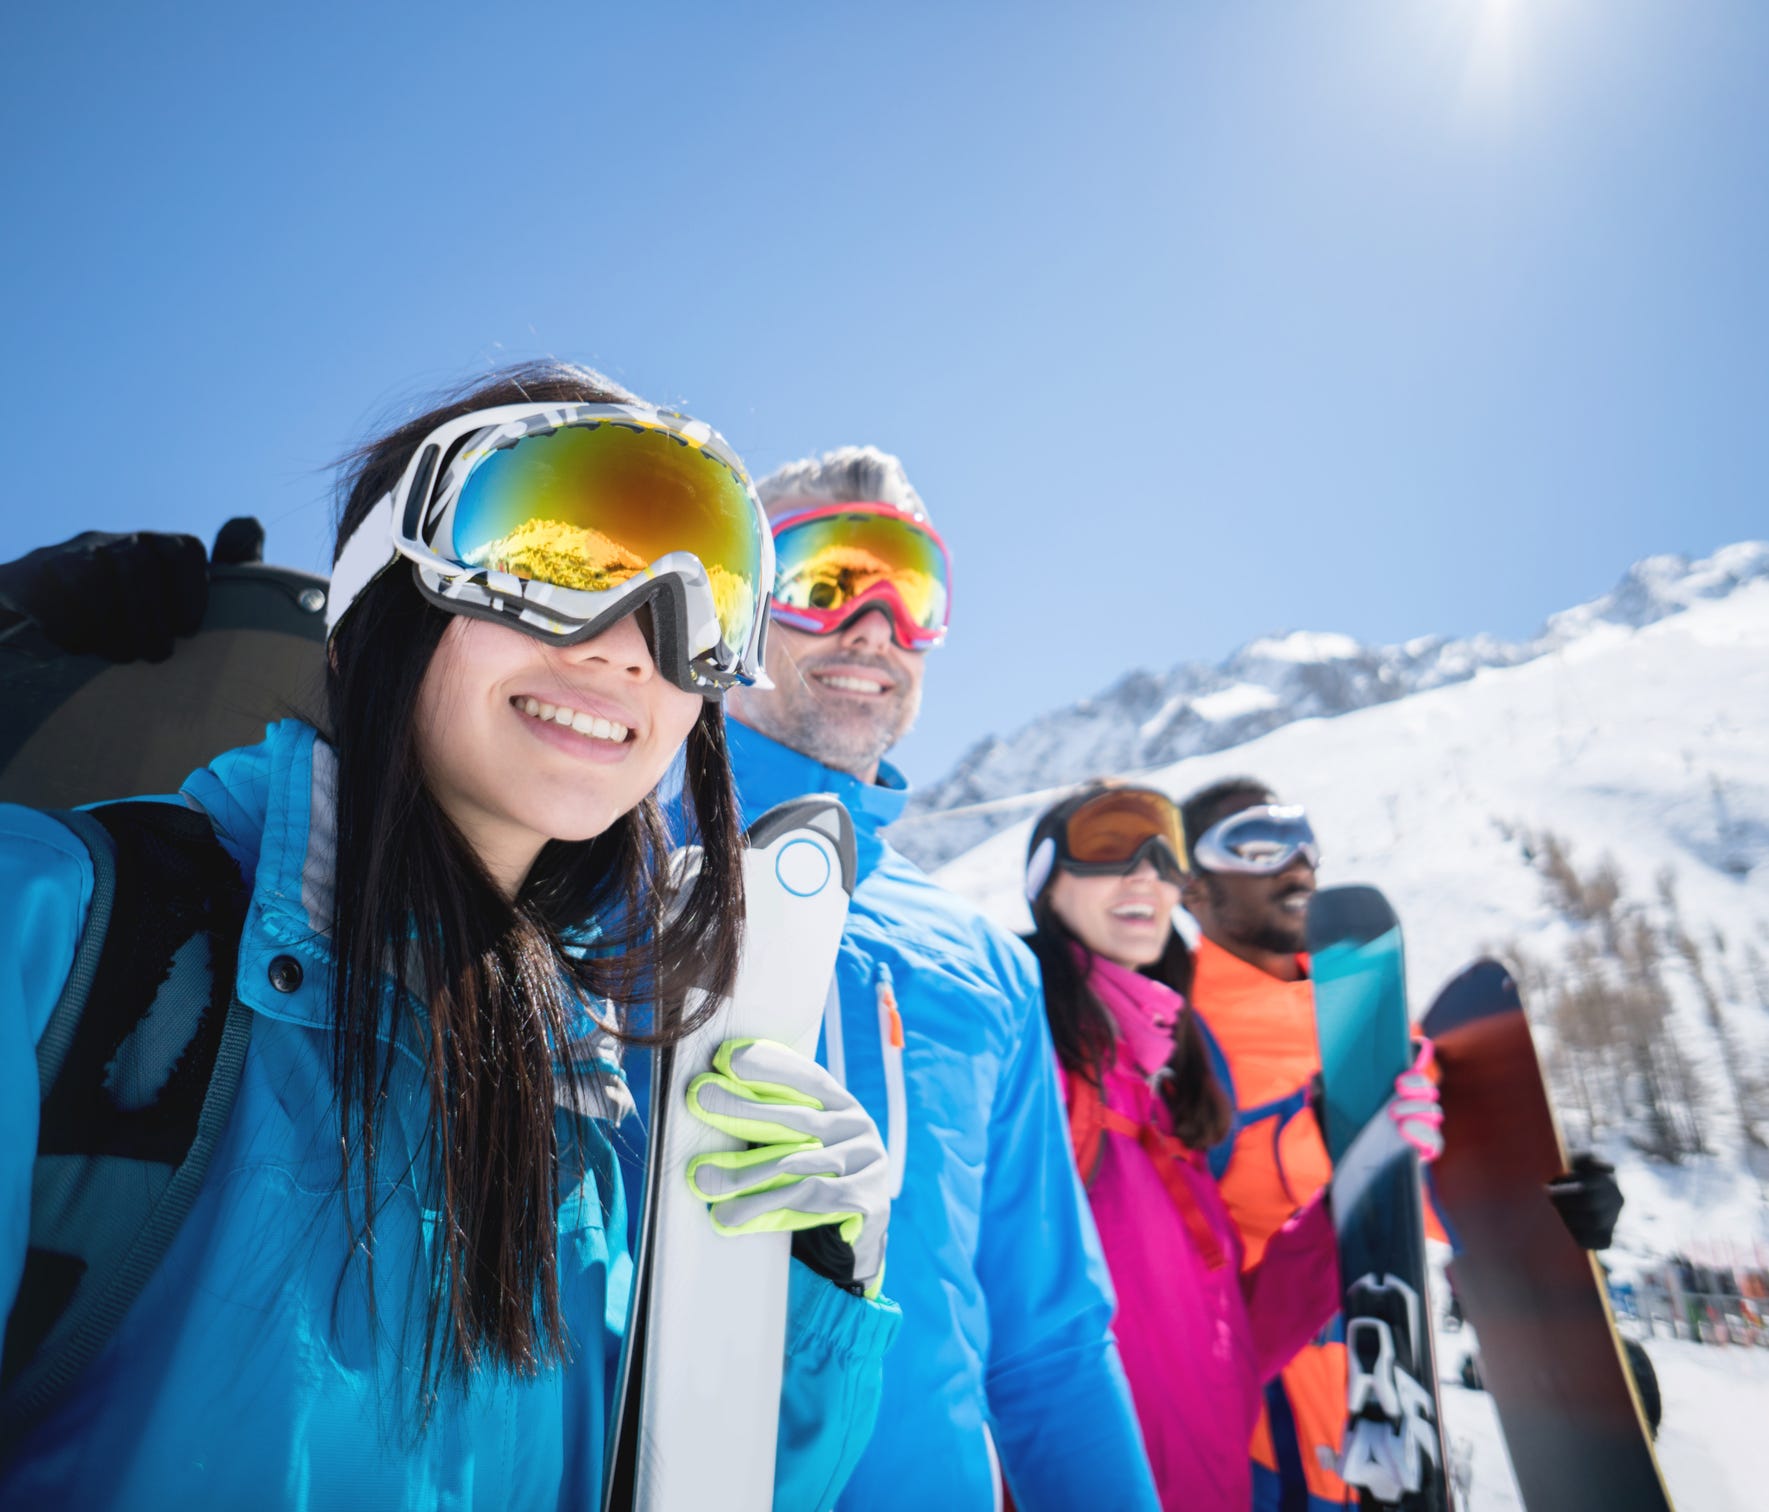 Happy group of people skiing and wearing goggles outdoors - winter sports concepts